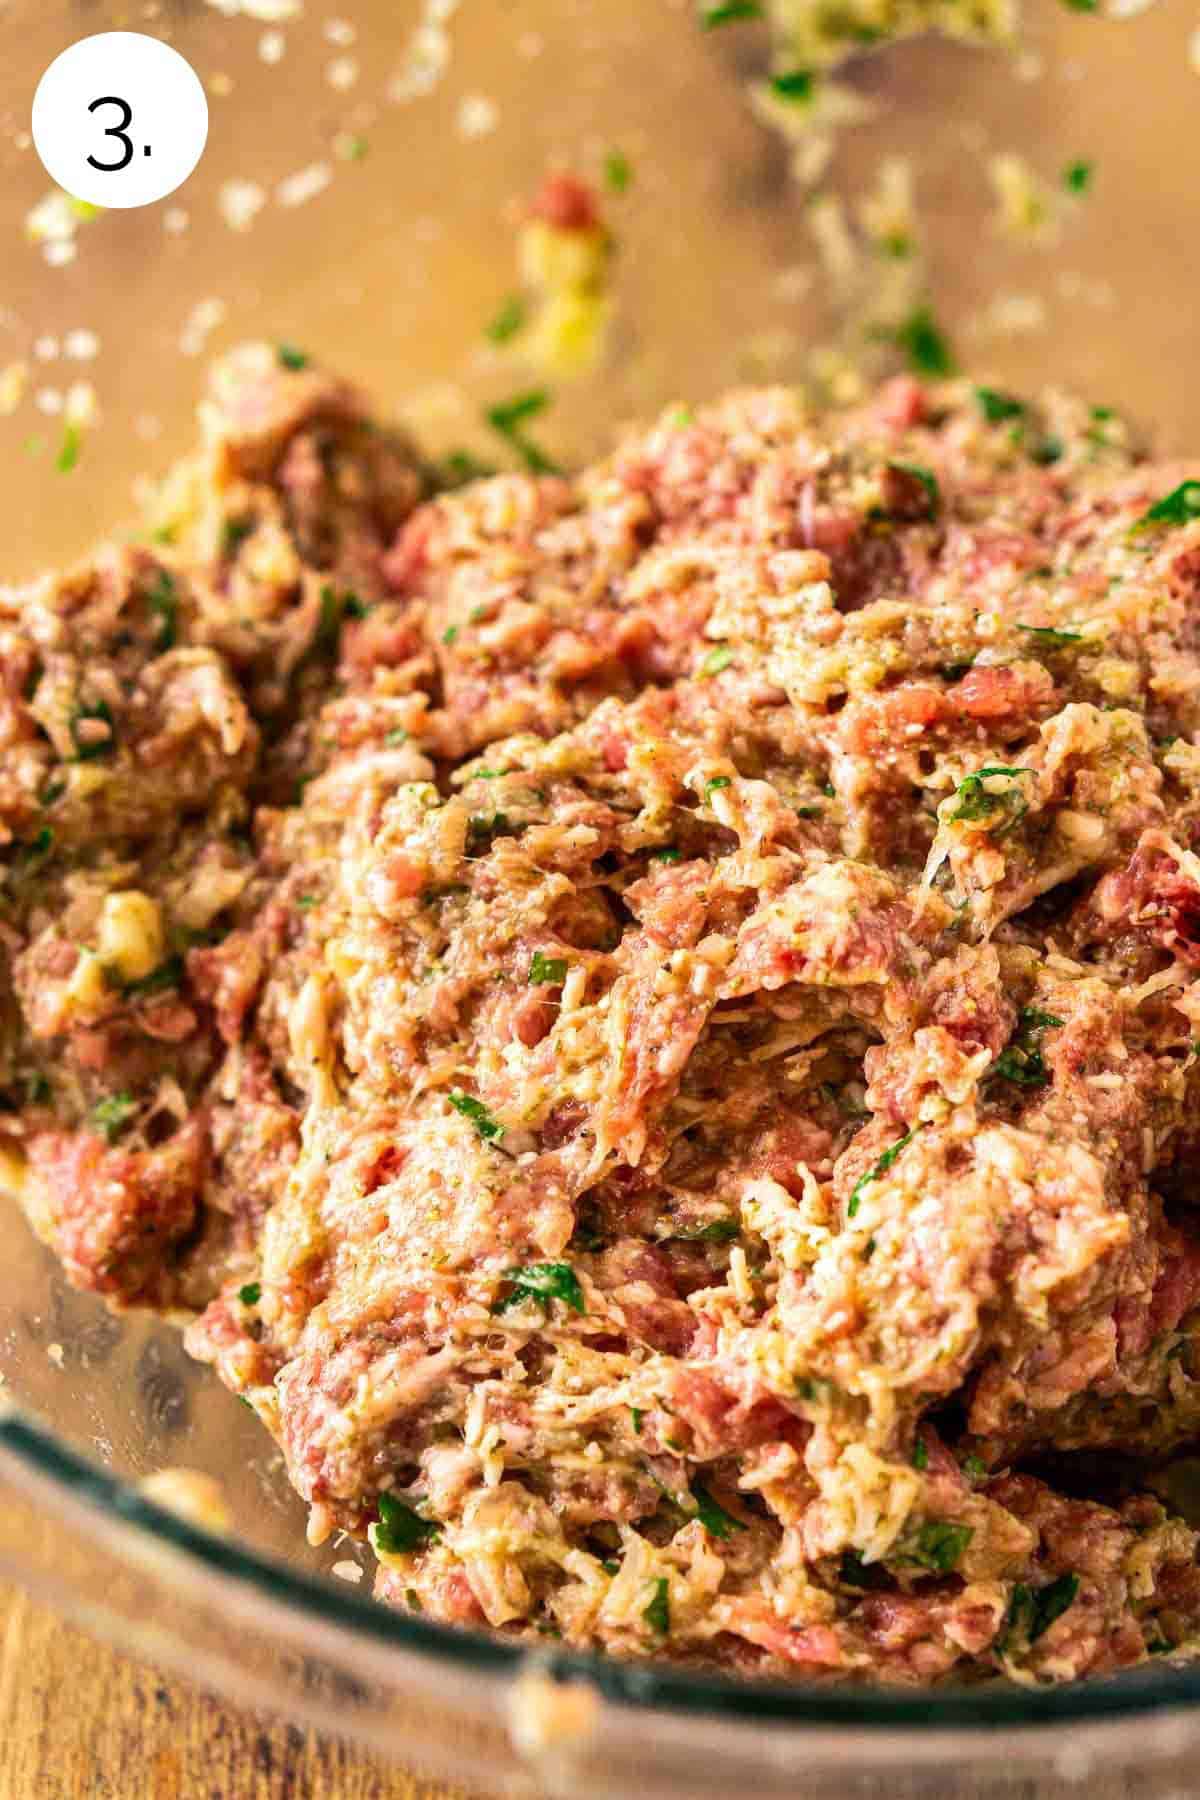 The ground beef and pork combined with the egg mixture in a large glass mixing bowl on a wooden surface.